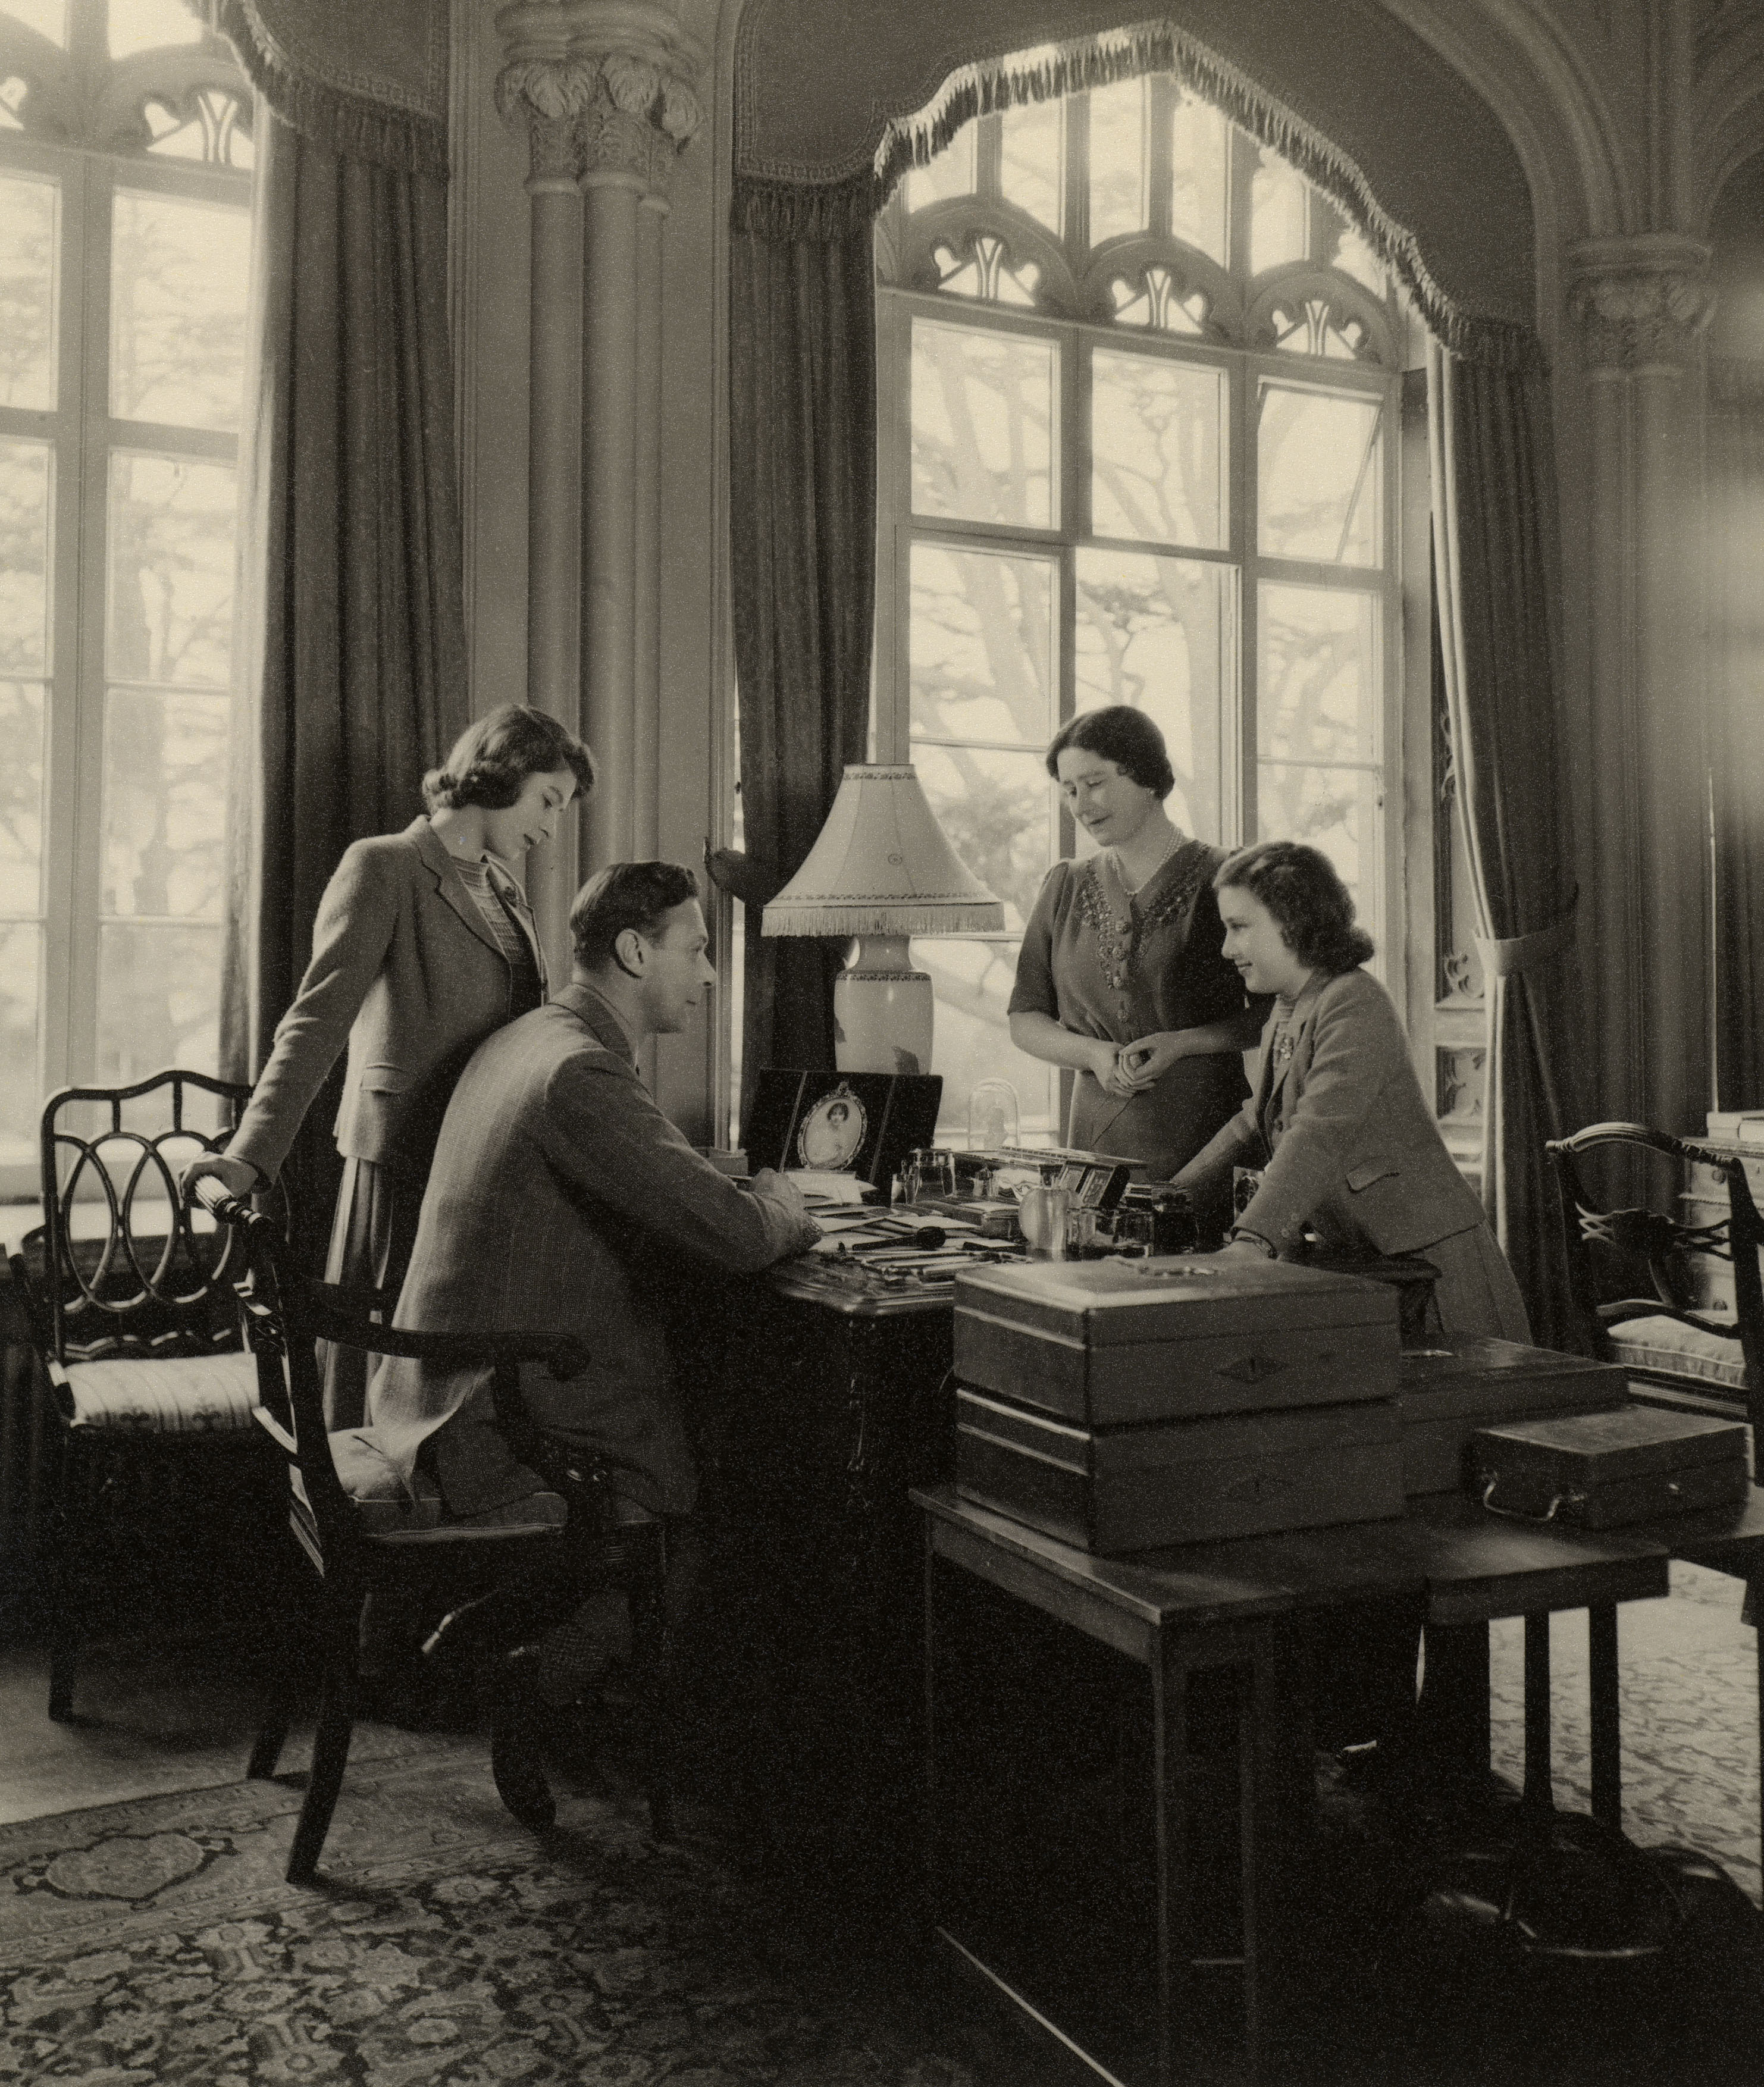 Then-Princess Elizabeth, King George VI, the Queen Mother and Princess Margaret at Royal Lodge in 1943